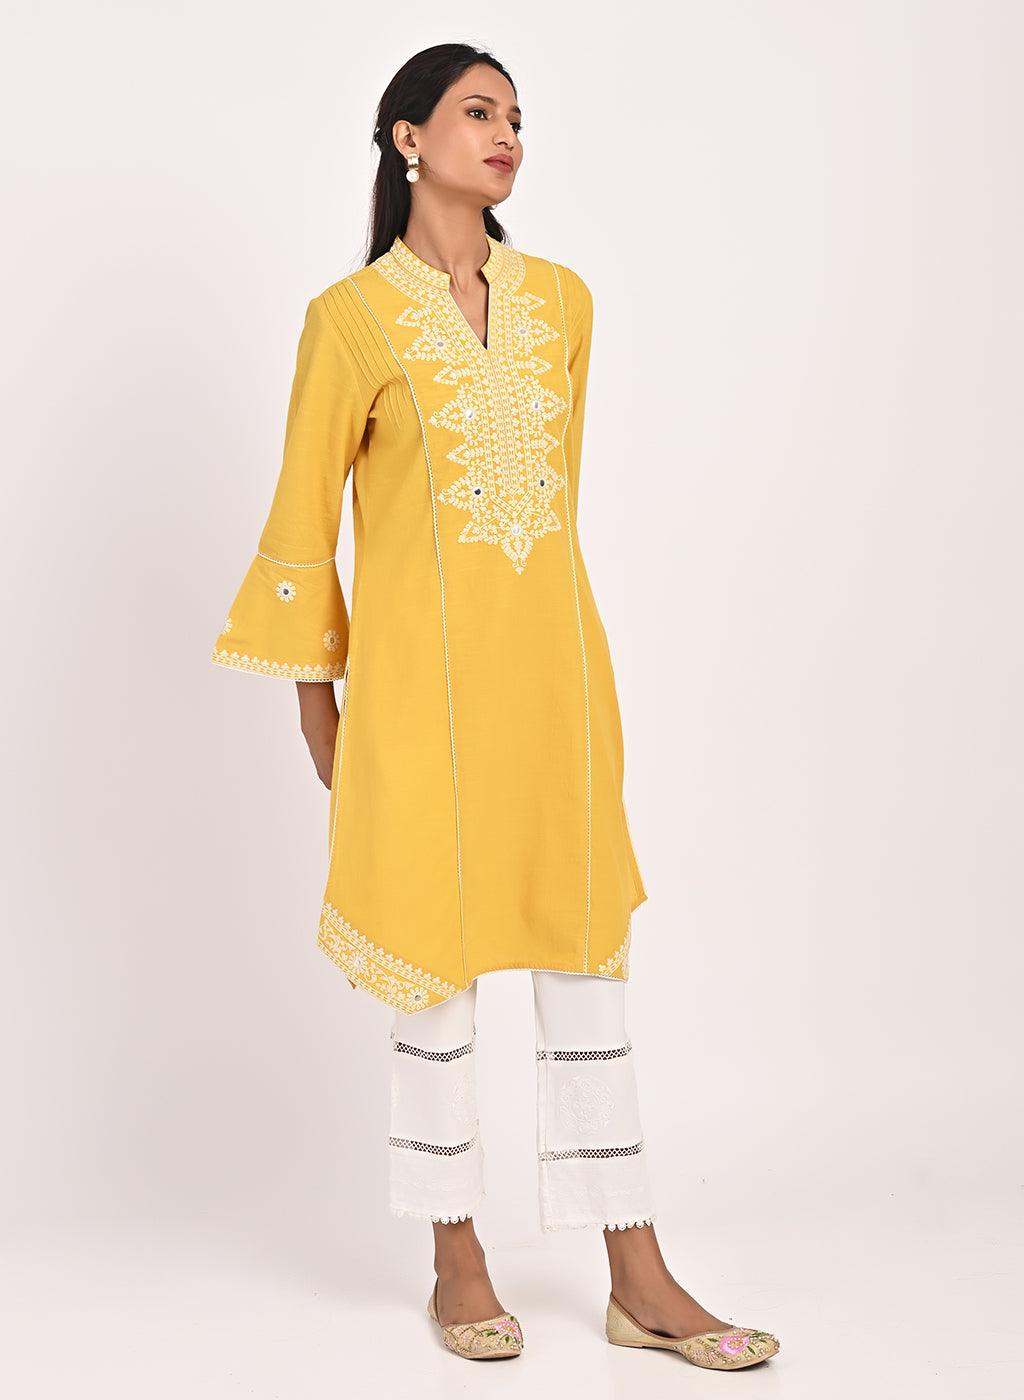 Yellow Mid-length Cotton Kurti for Women with Embroidery - Lakshita